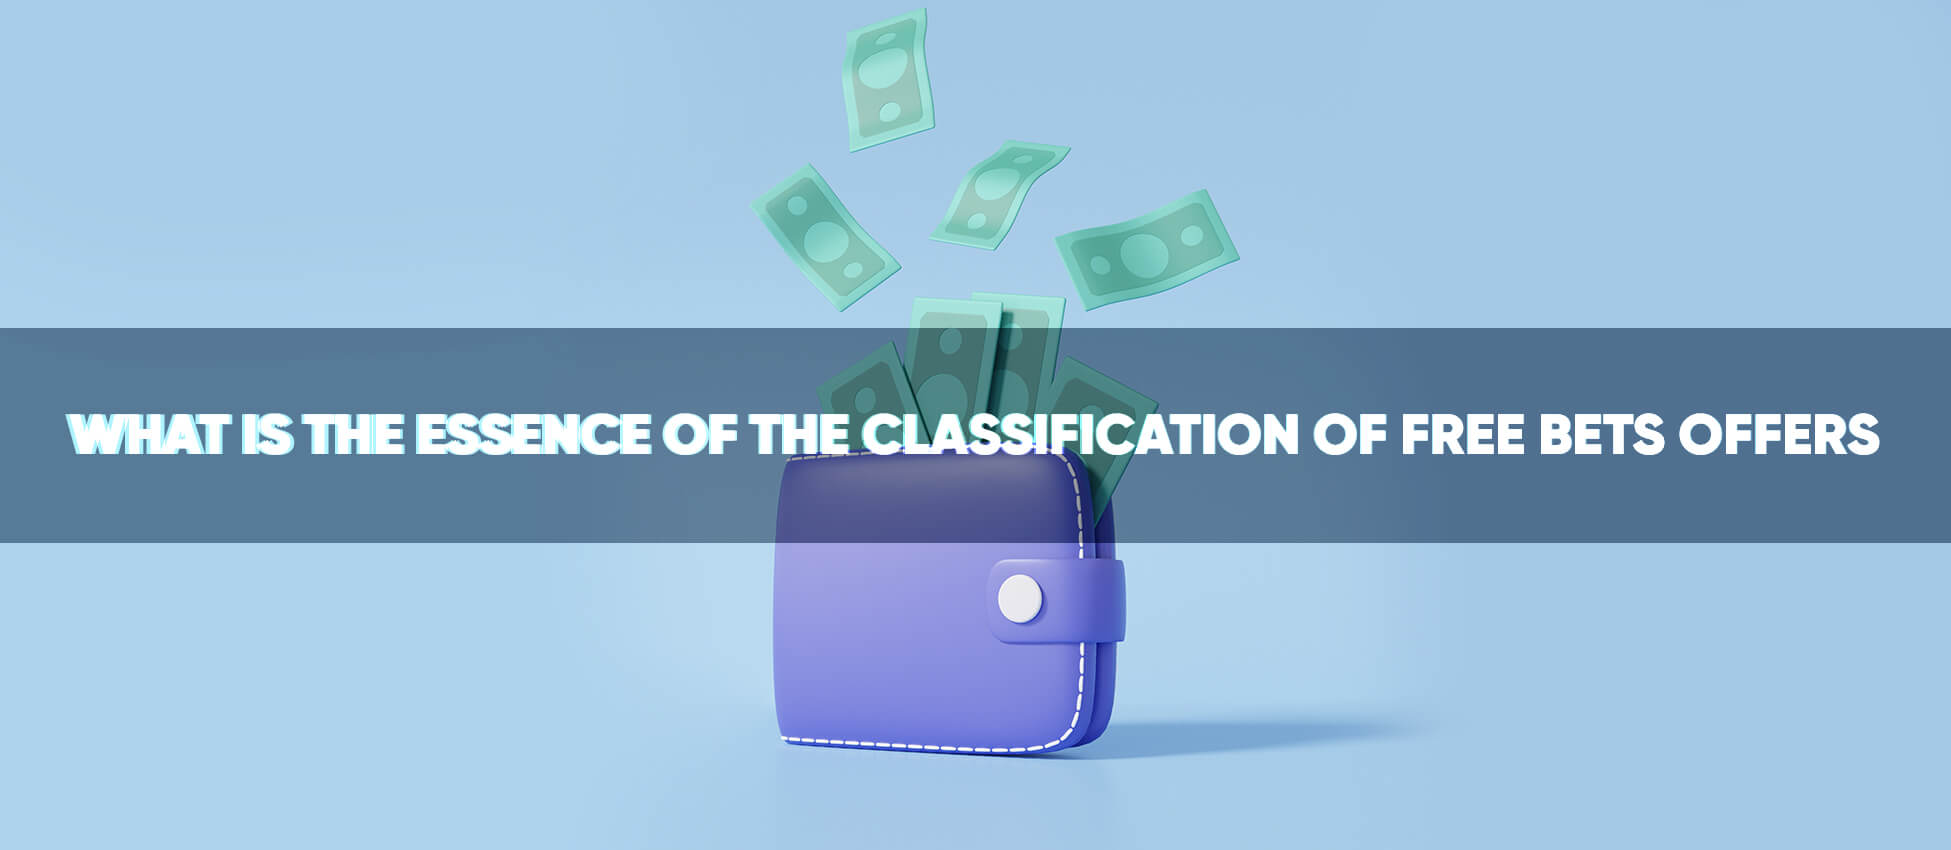 What is the essence of the classification of free bets offers